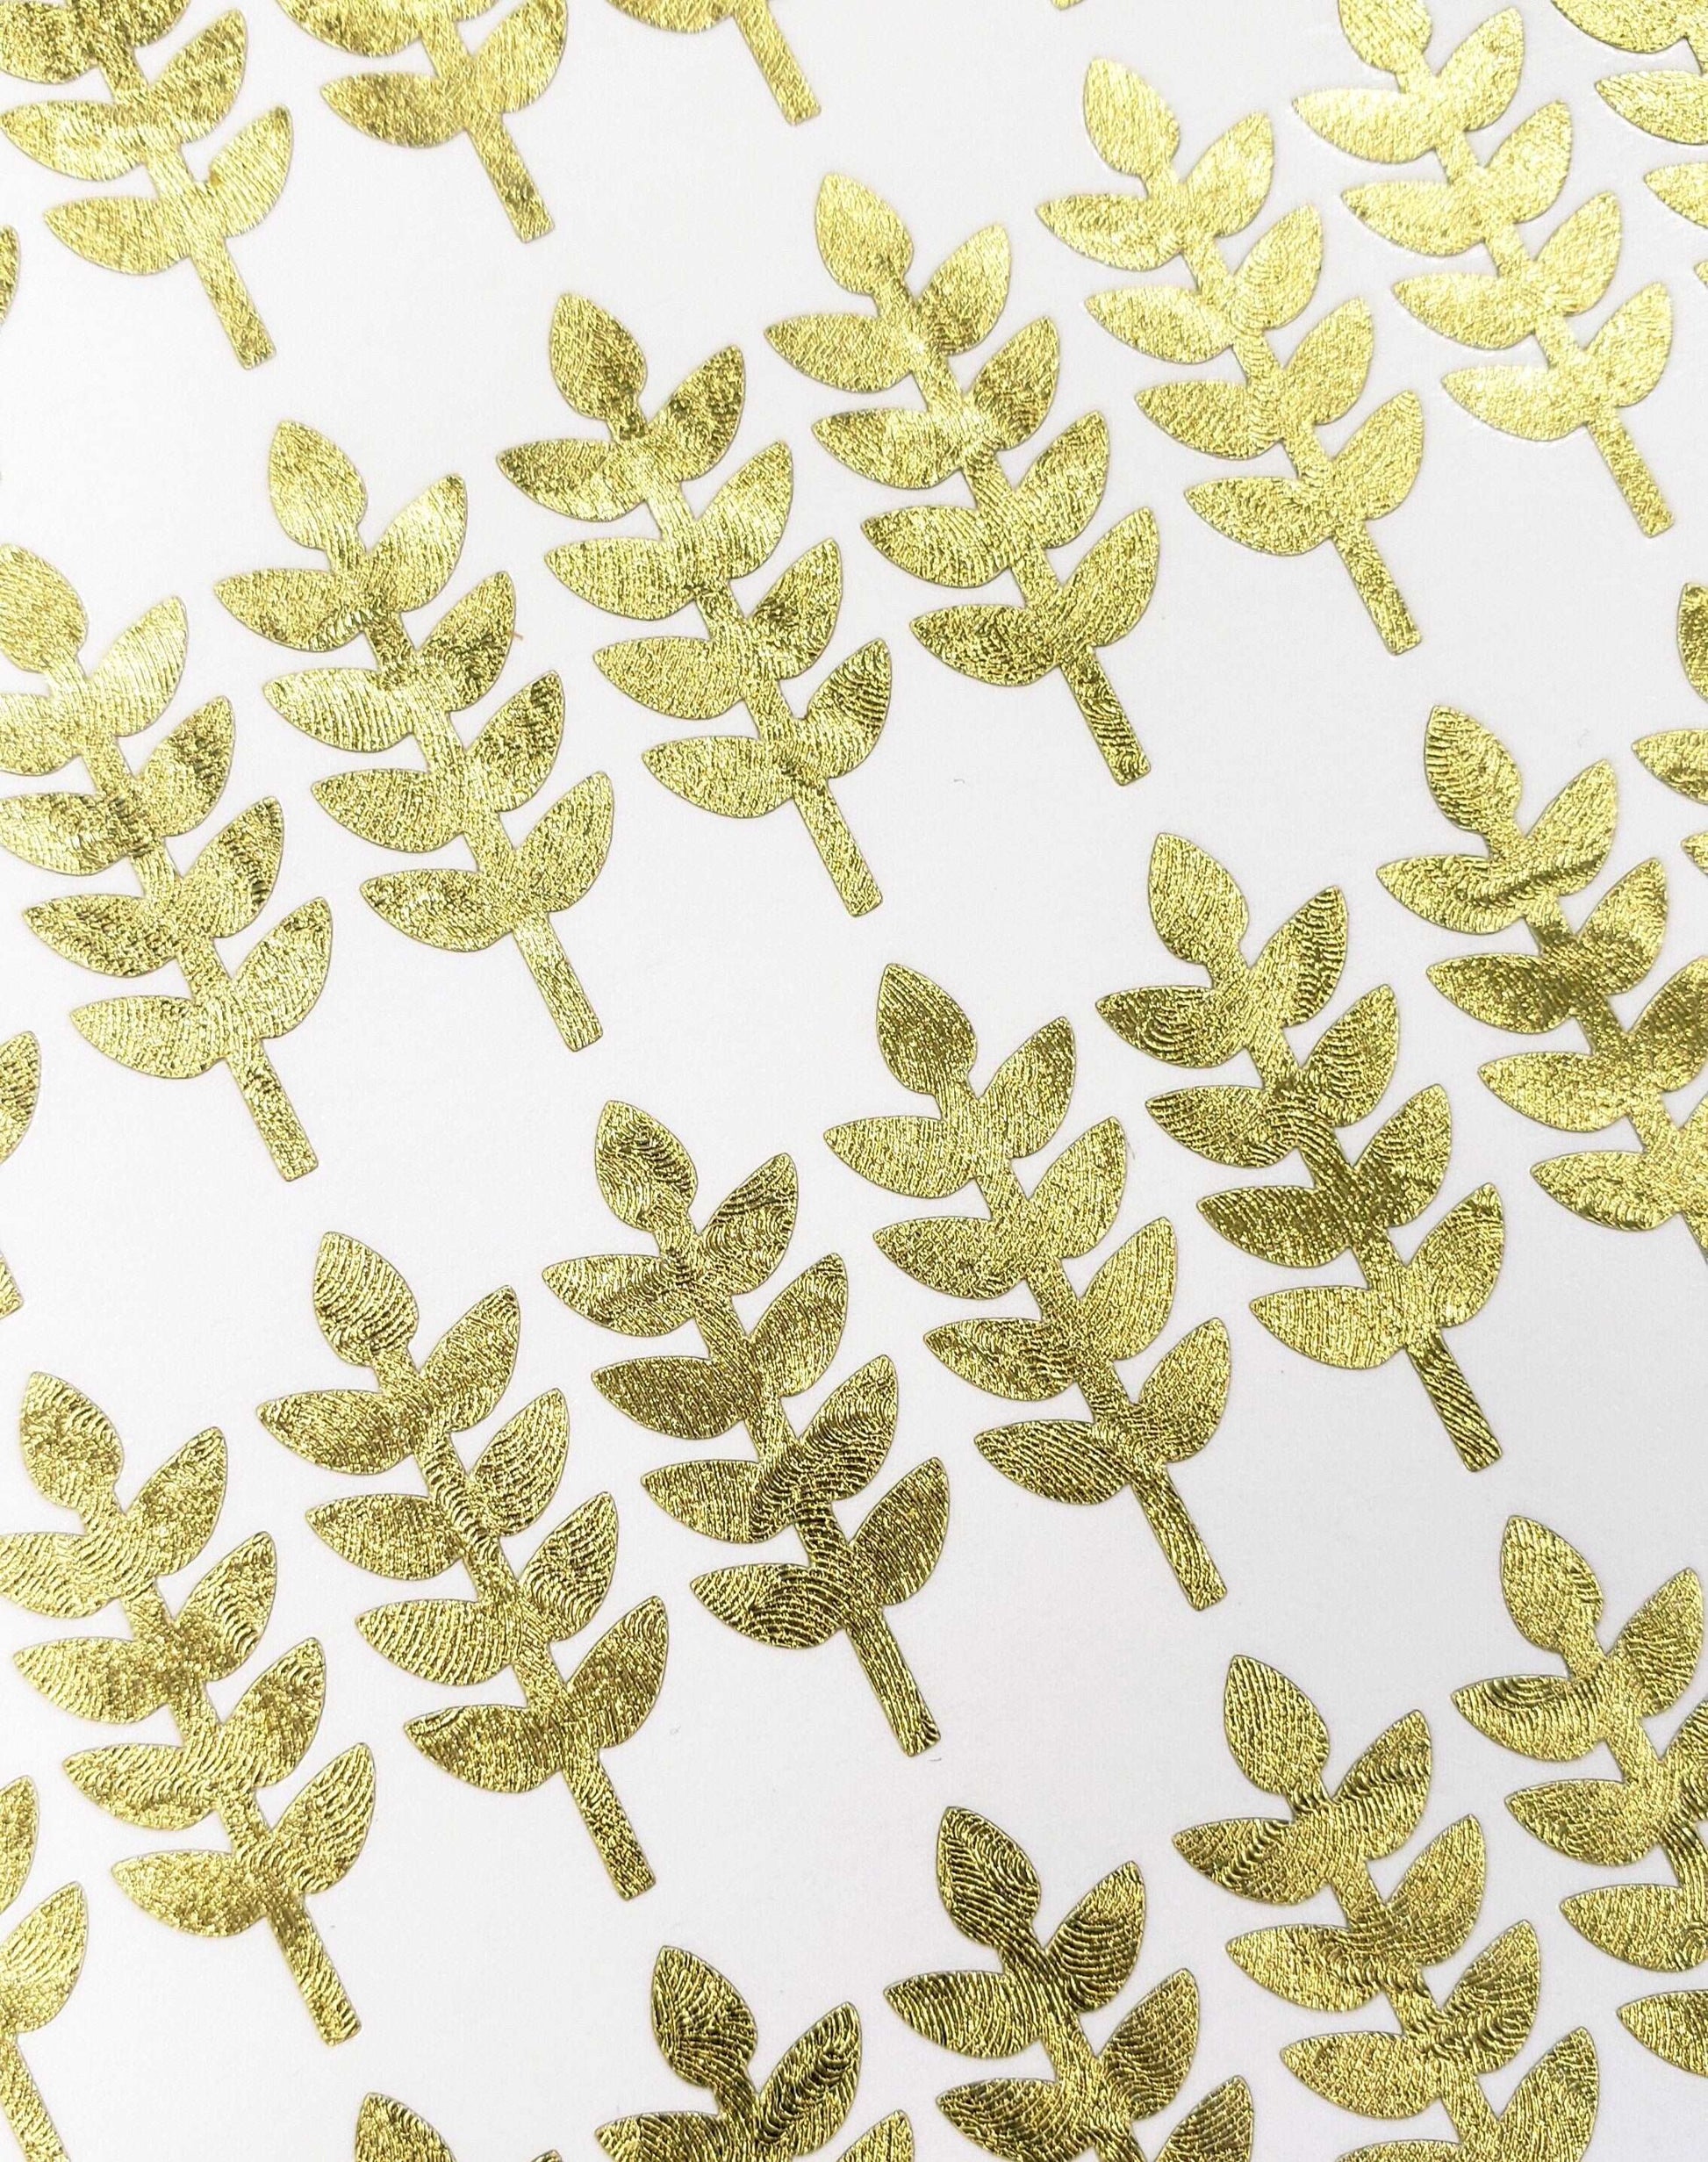 Gold Wheat Leaf Stickers, set of 60 small golden metallic wheat stem decals for envelopes and invitations